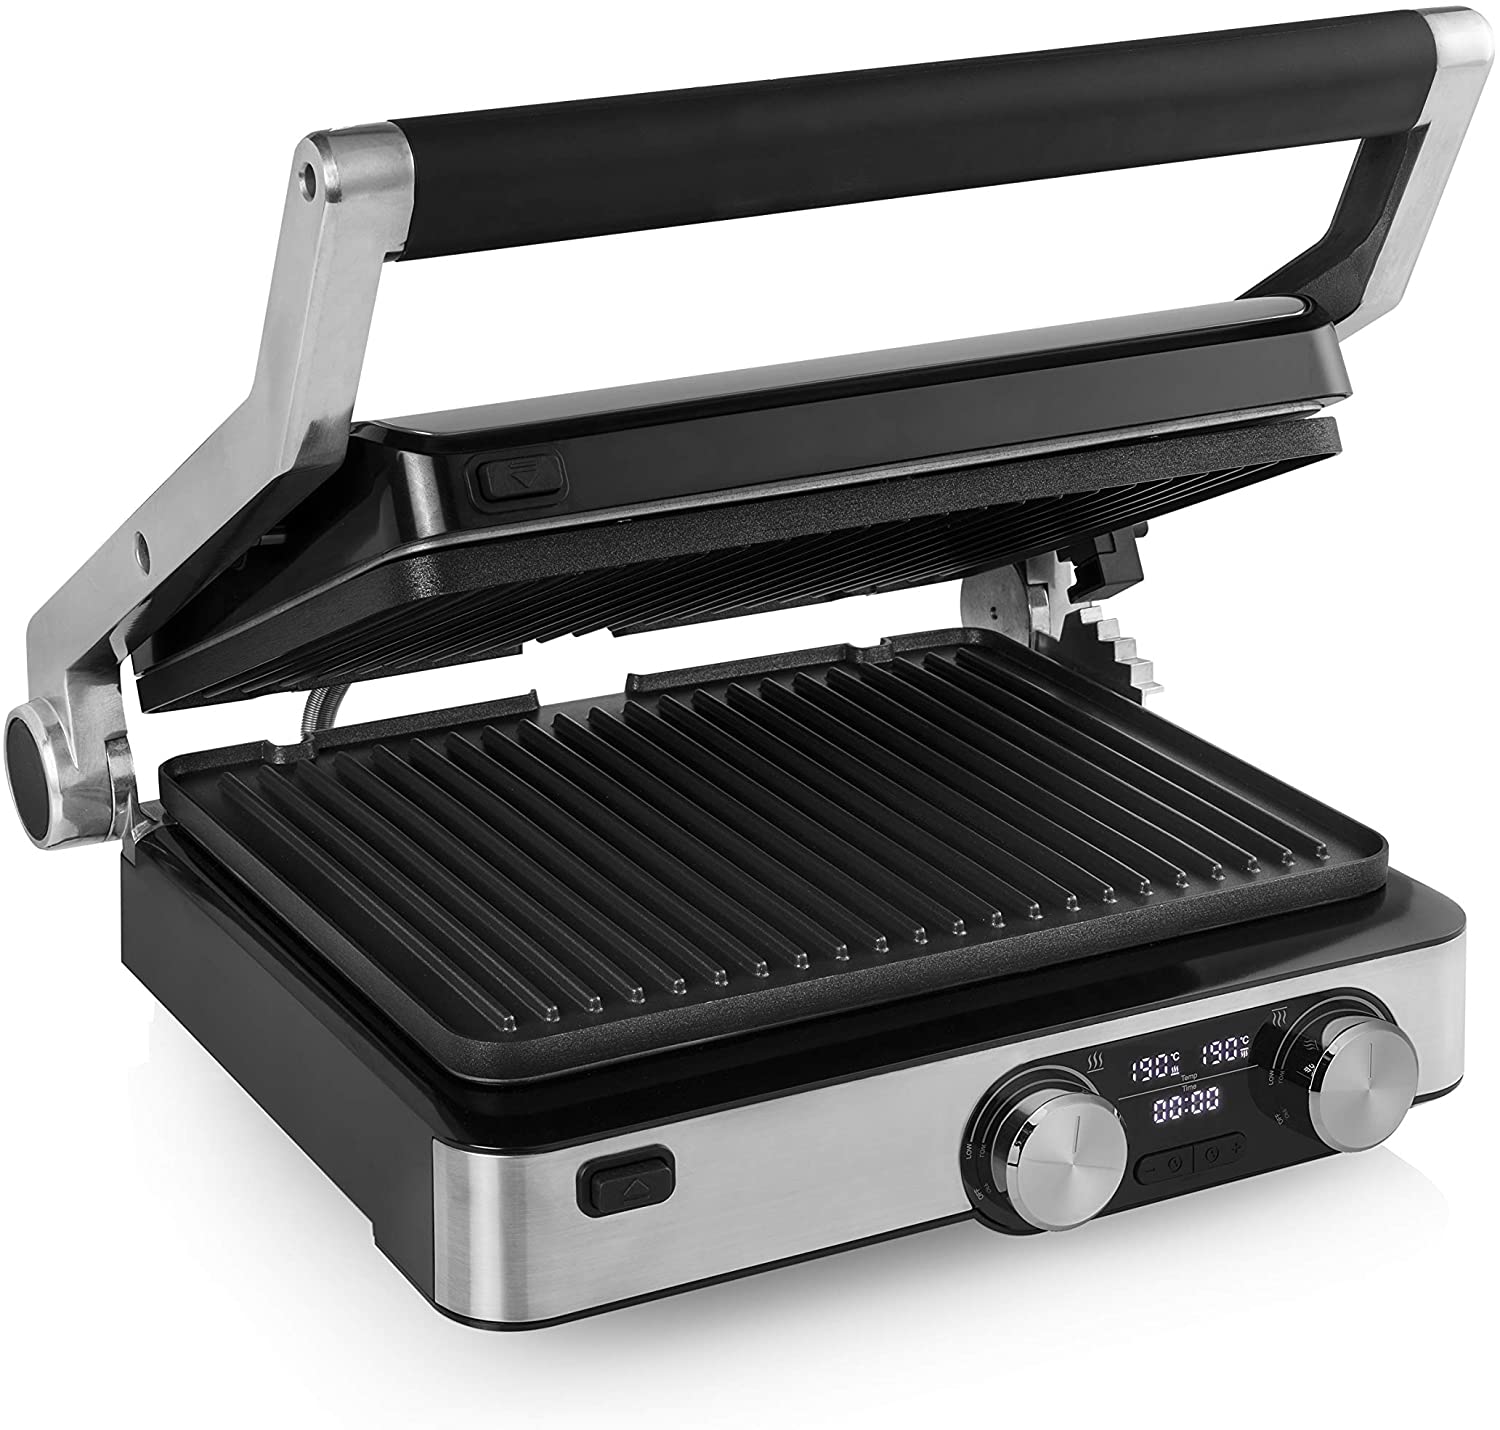 Princess 112536 Multi-Grill 4-in-1, Sandwich / Contact / Table Grill and Waffle Iron, Interchangeable Plates, Stainless Steel, Non-Stick Coating, Black/Silver